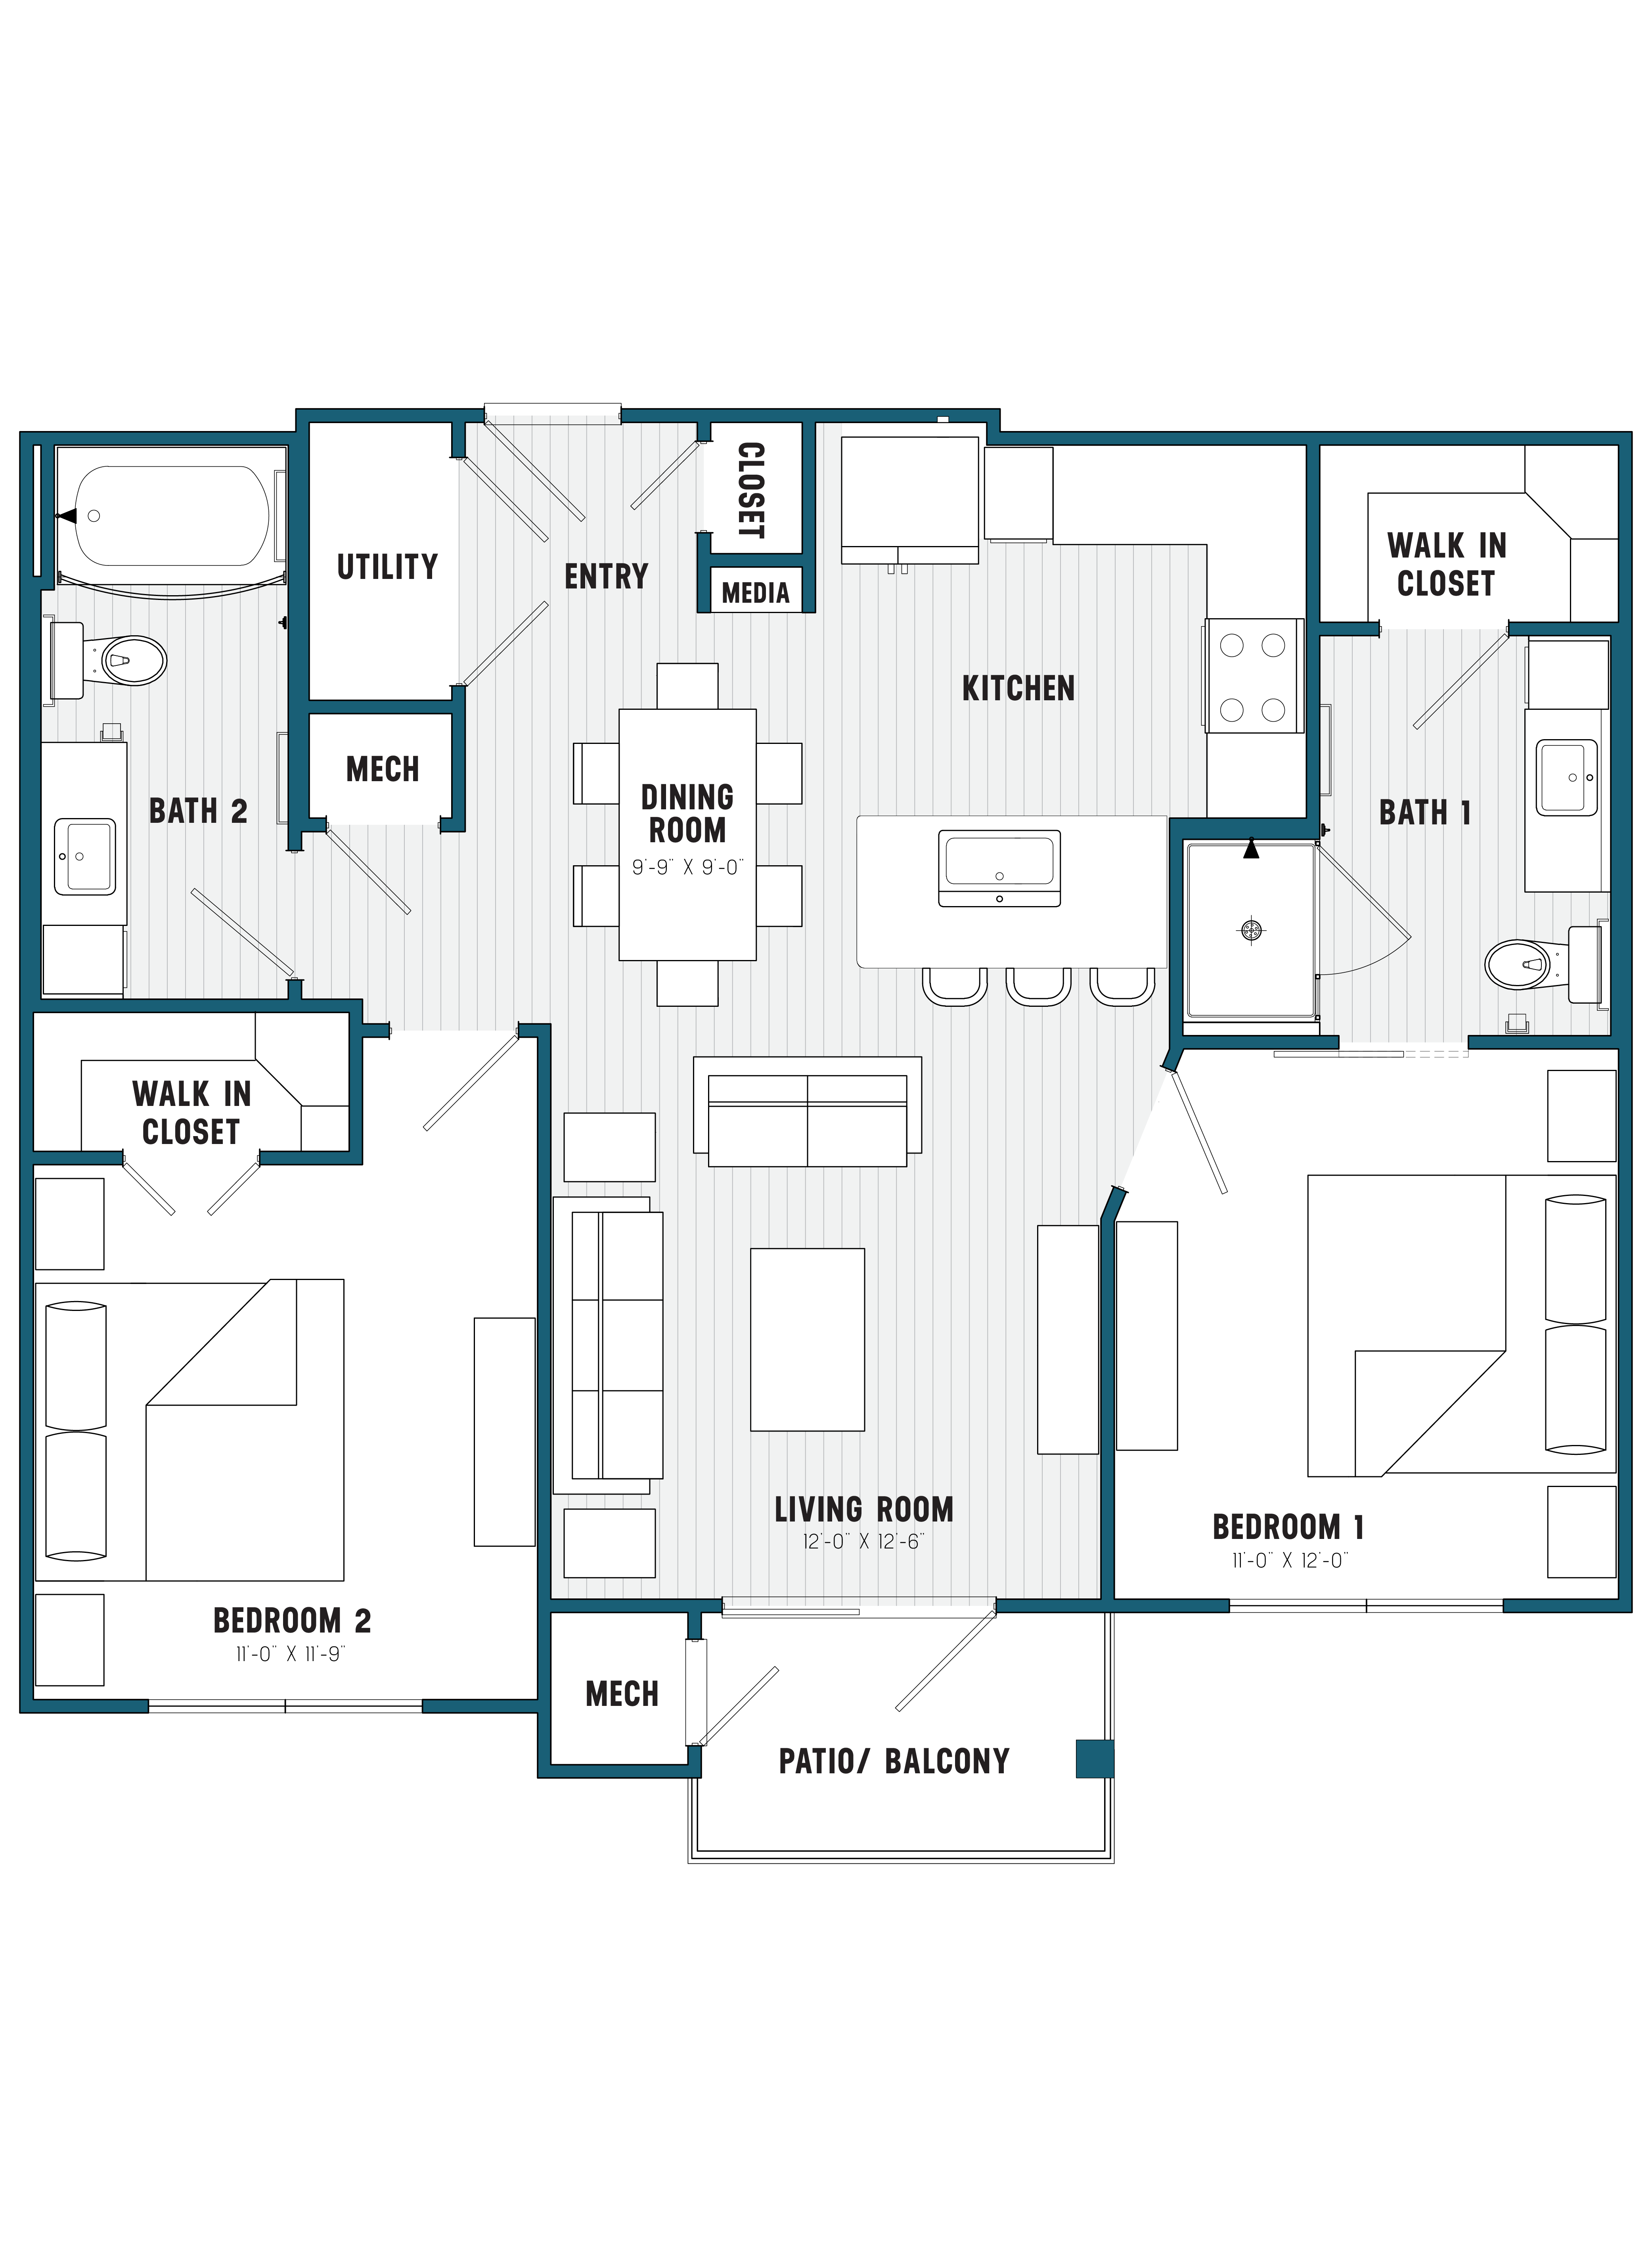 Two-bedroom apartment floor plan at Brookland Apartments in West Columbia, SC